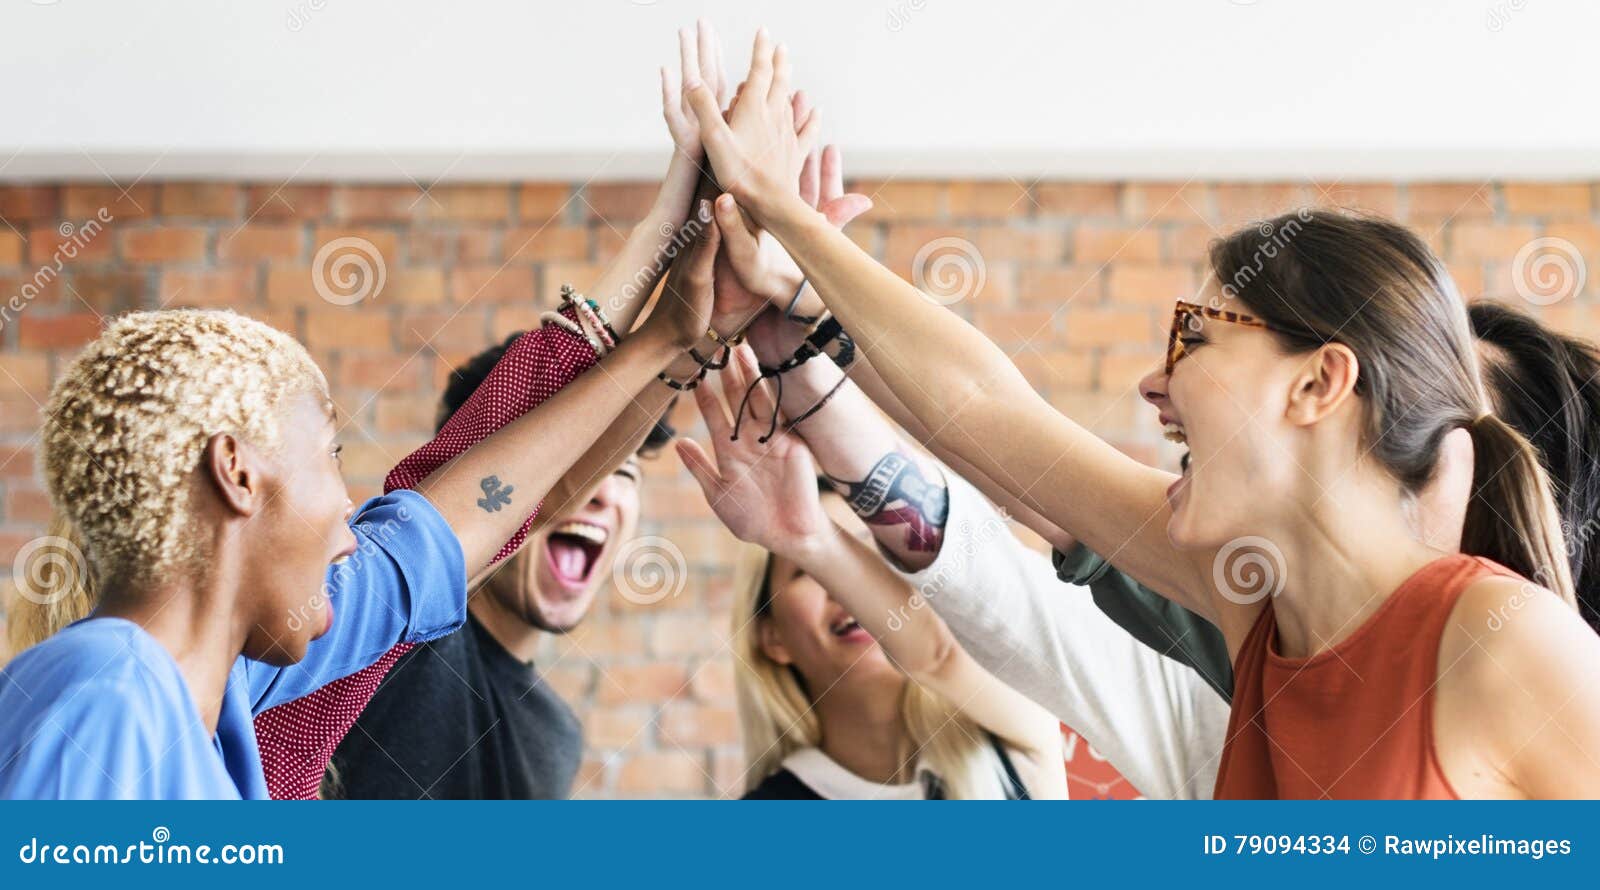 teamwork power successful meeting workplace concept